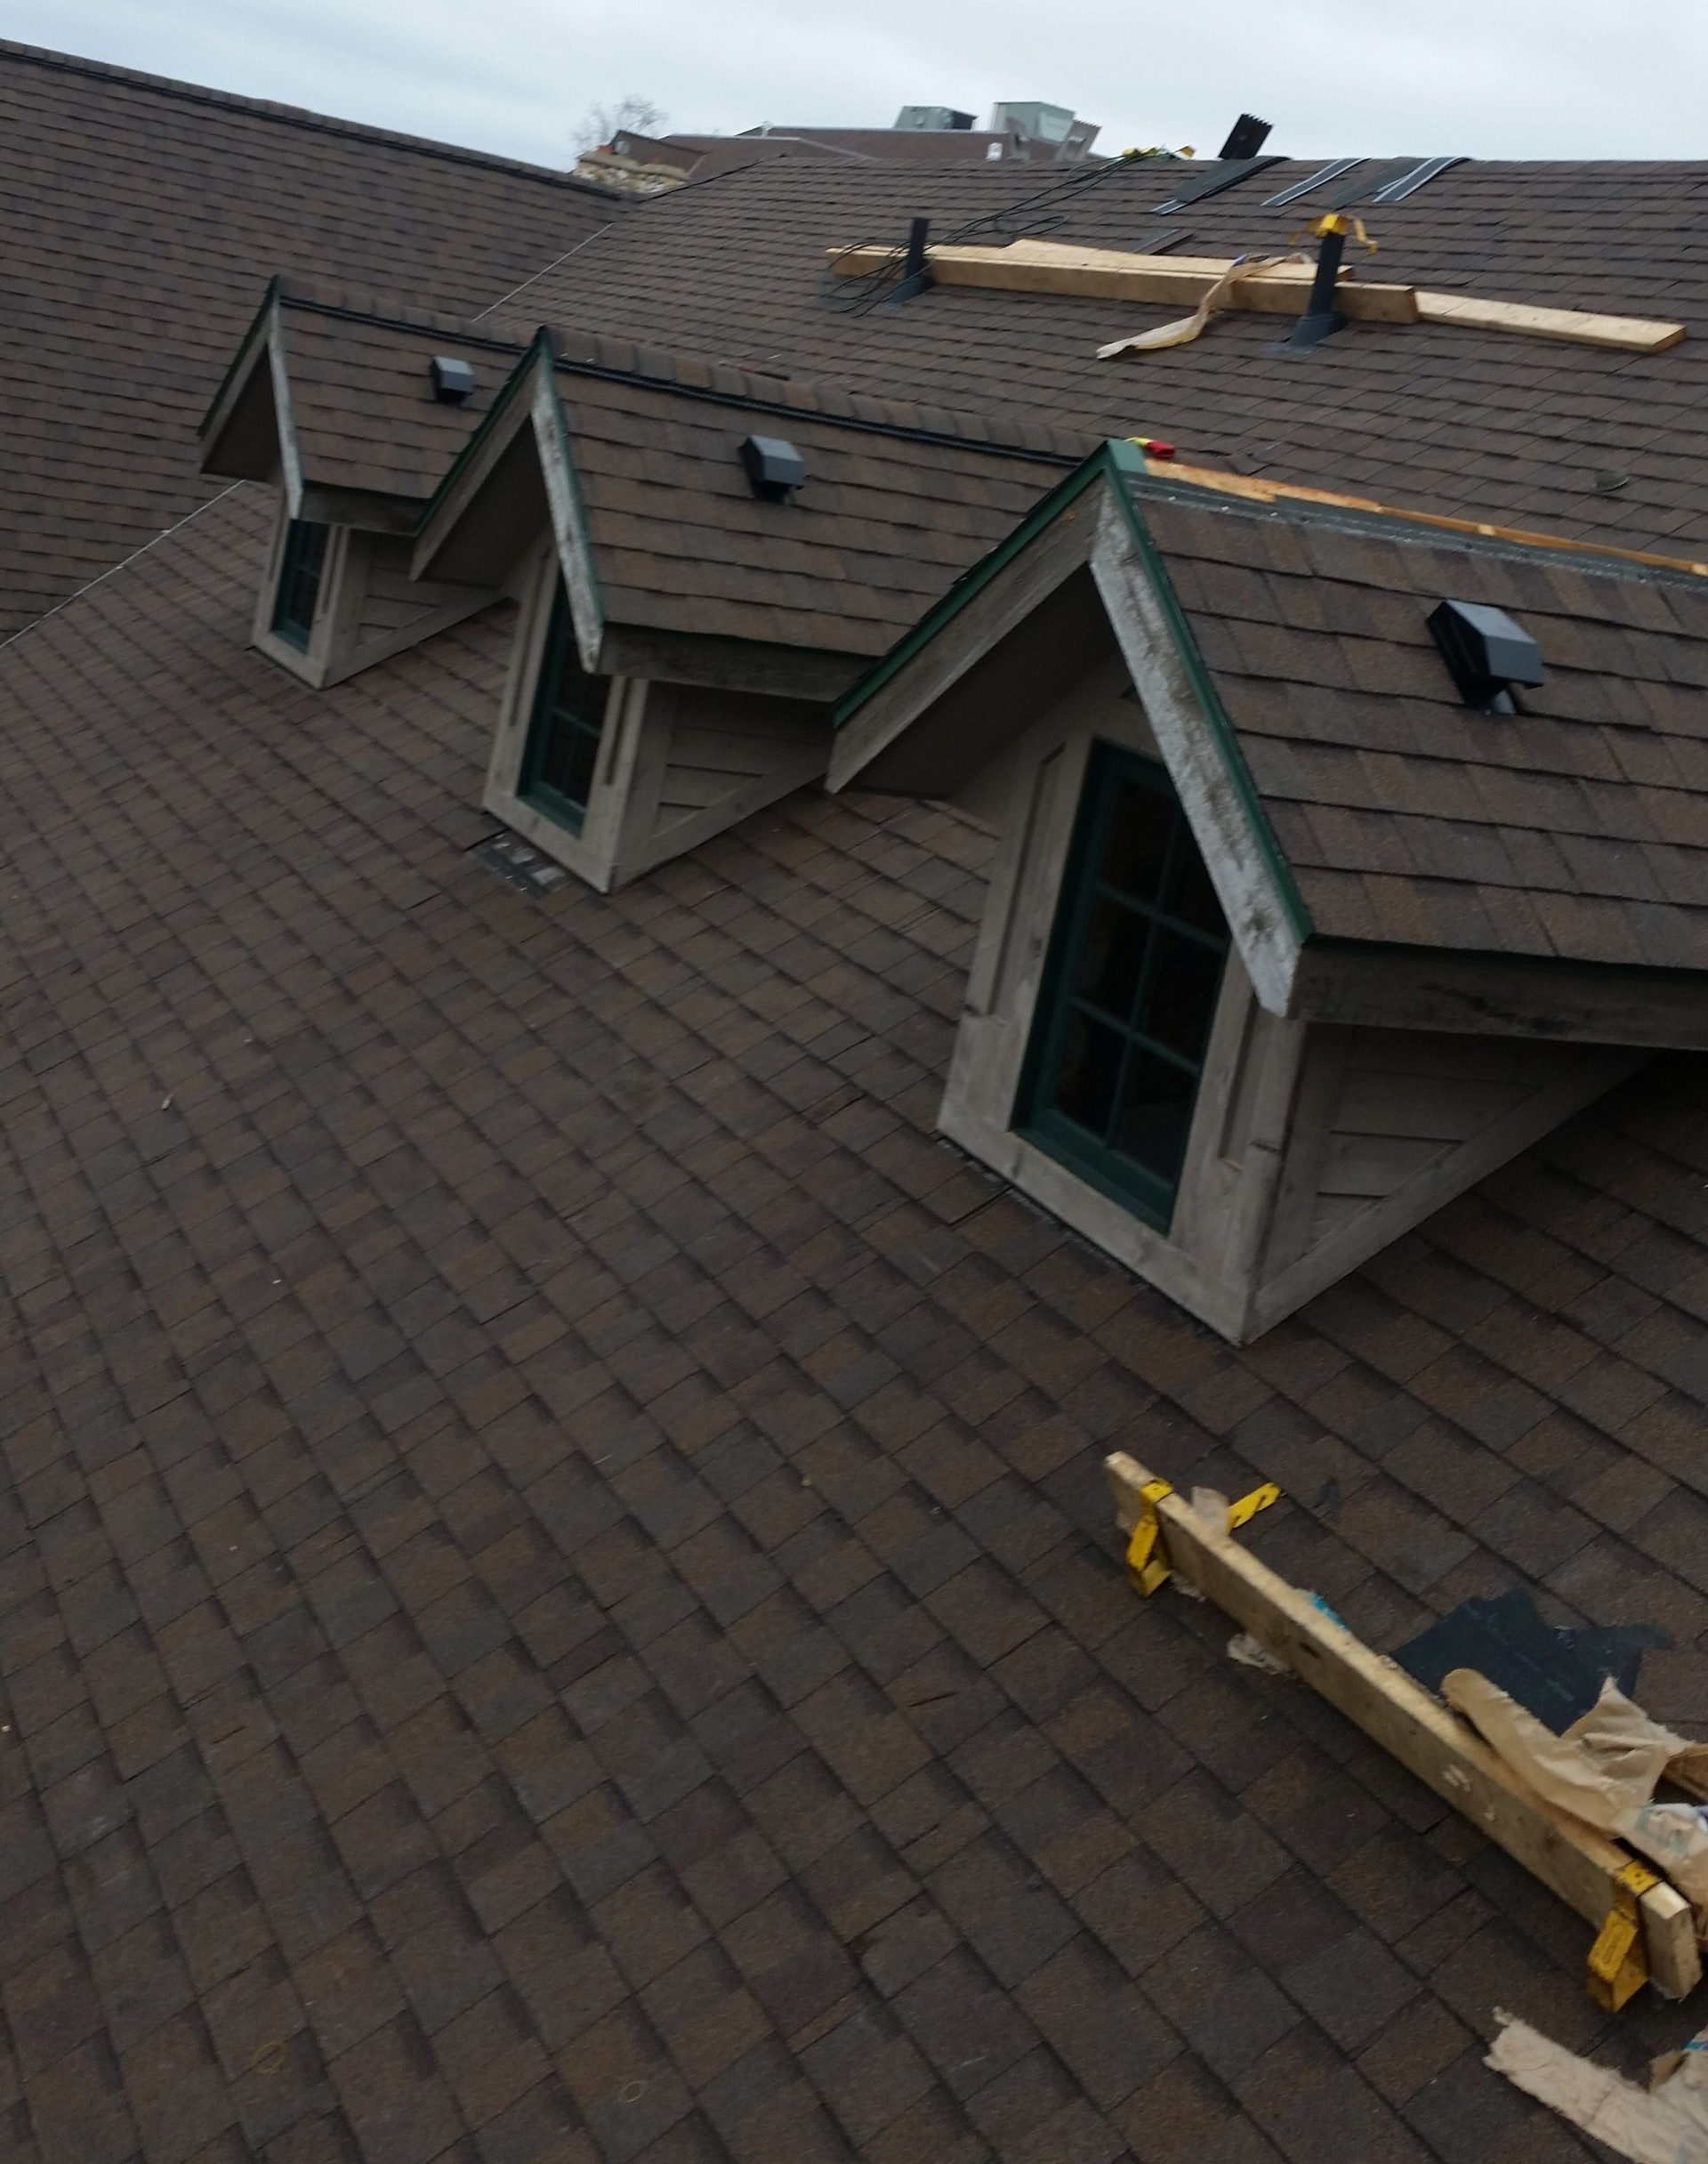 New Dimensional Asphalt Shingle Complex Roof - New Richland, MN - Tom’s Miller’s Roofing